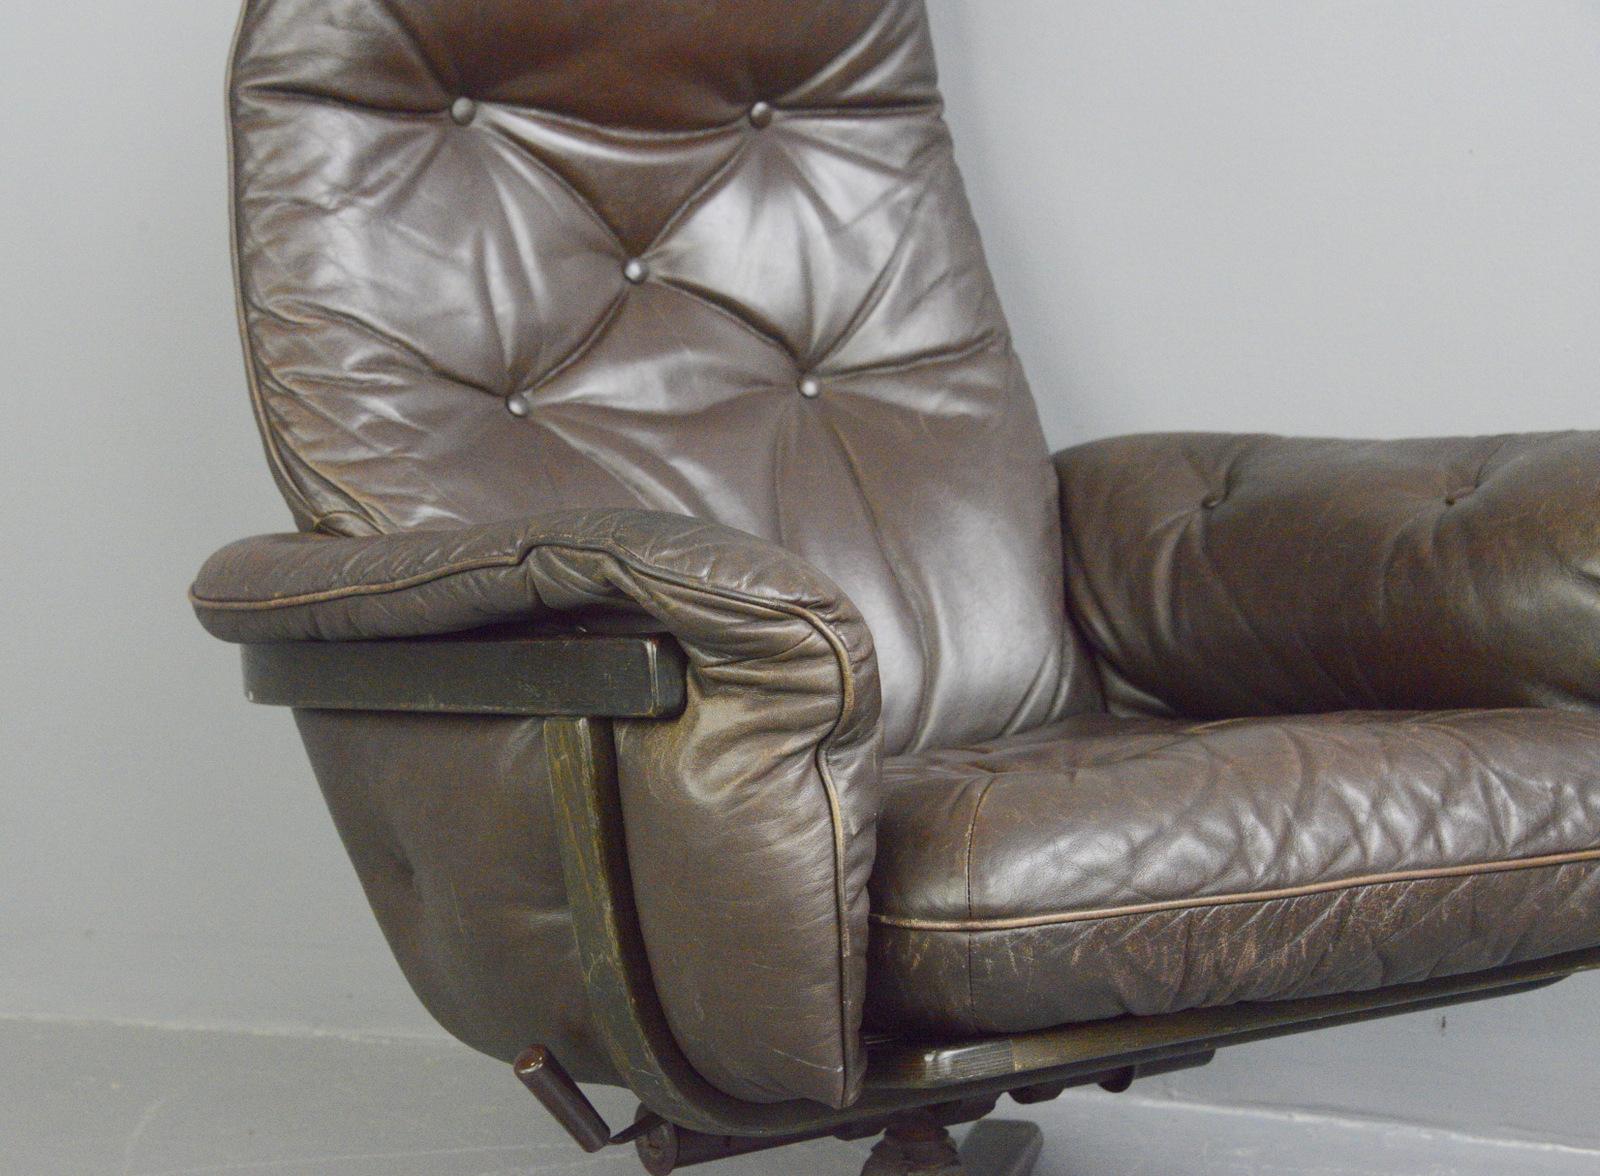 Leather lounge chair by G Mobel, circa 1960s

- Chocolate brown leather
- Button back
- Swivels and reclines
- Bentwood frame
- Produced by G Mobel
- Swedish ~ 1960s
- Measures: 85cm wide x 80cm deep x 102cm tall
- 44cm seat